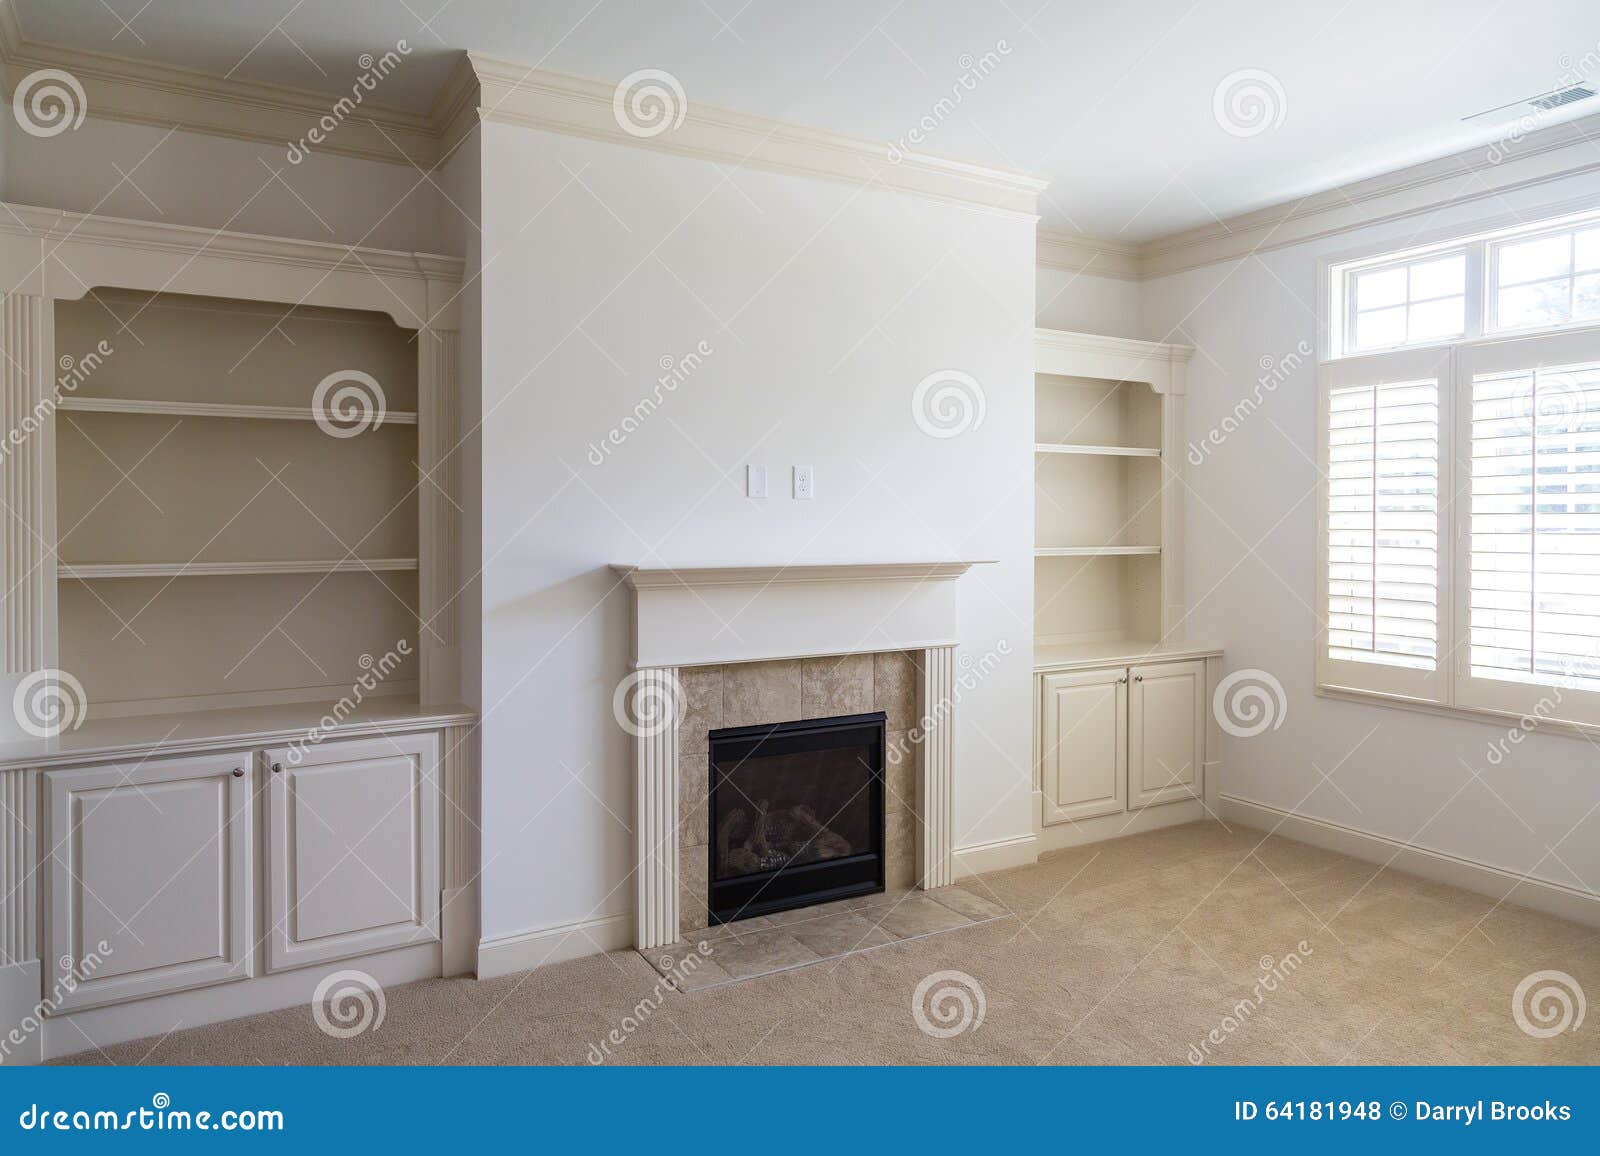 Built In Bookcases In Empty Room Stock Photo Image Of Empty